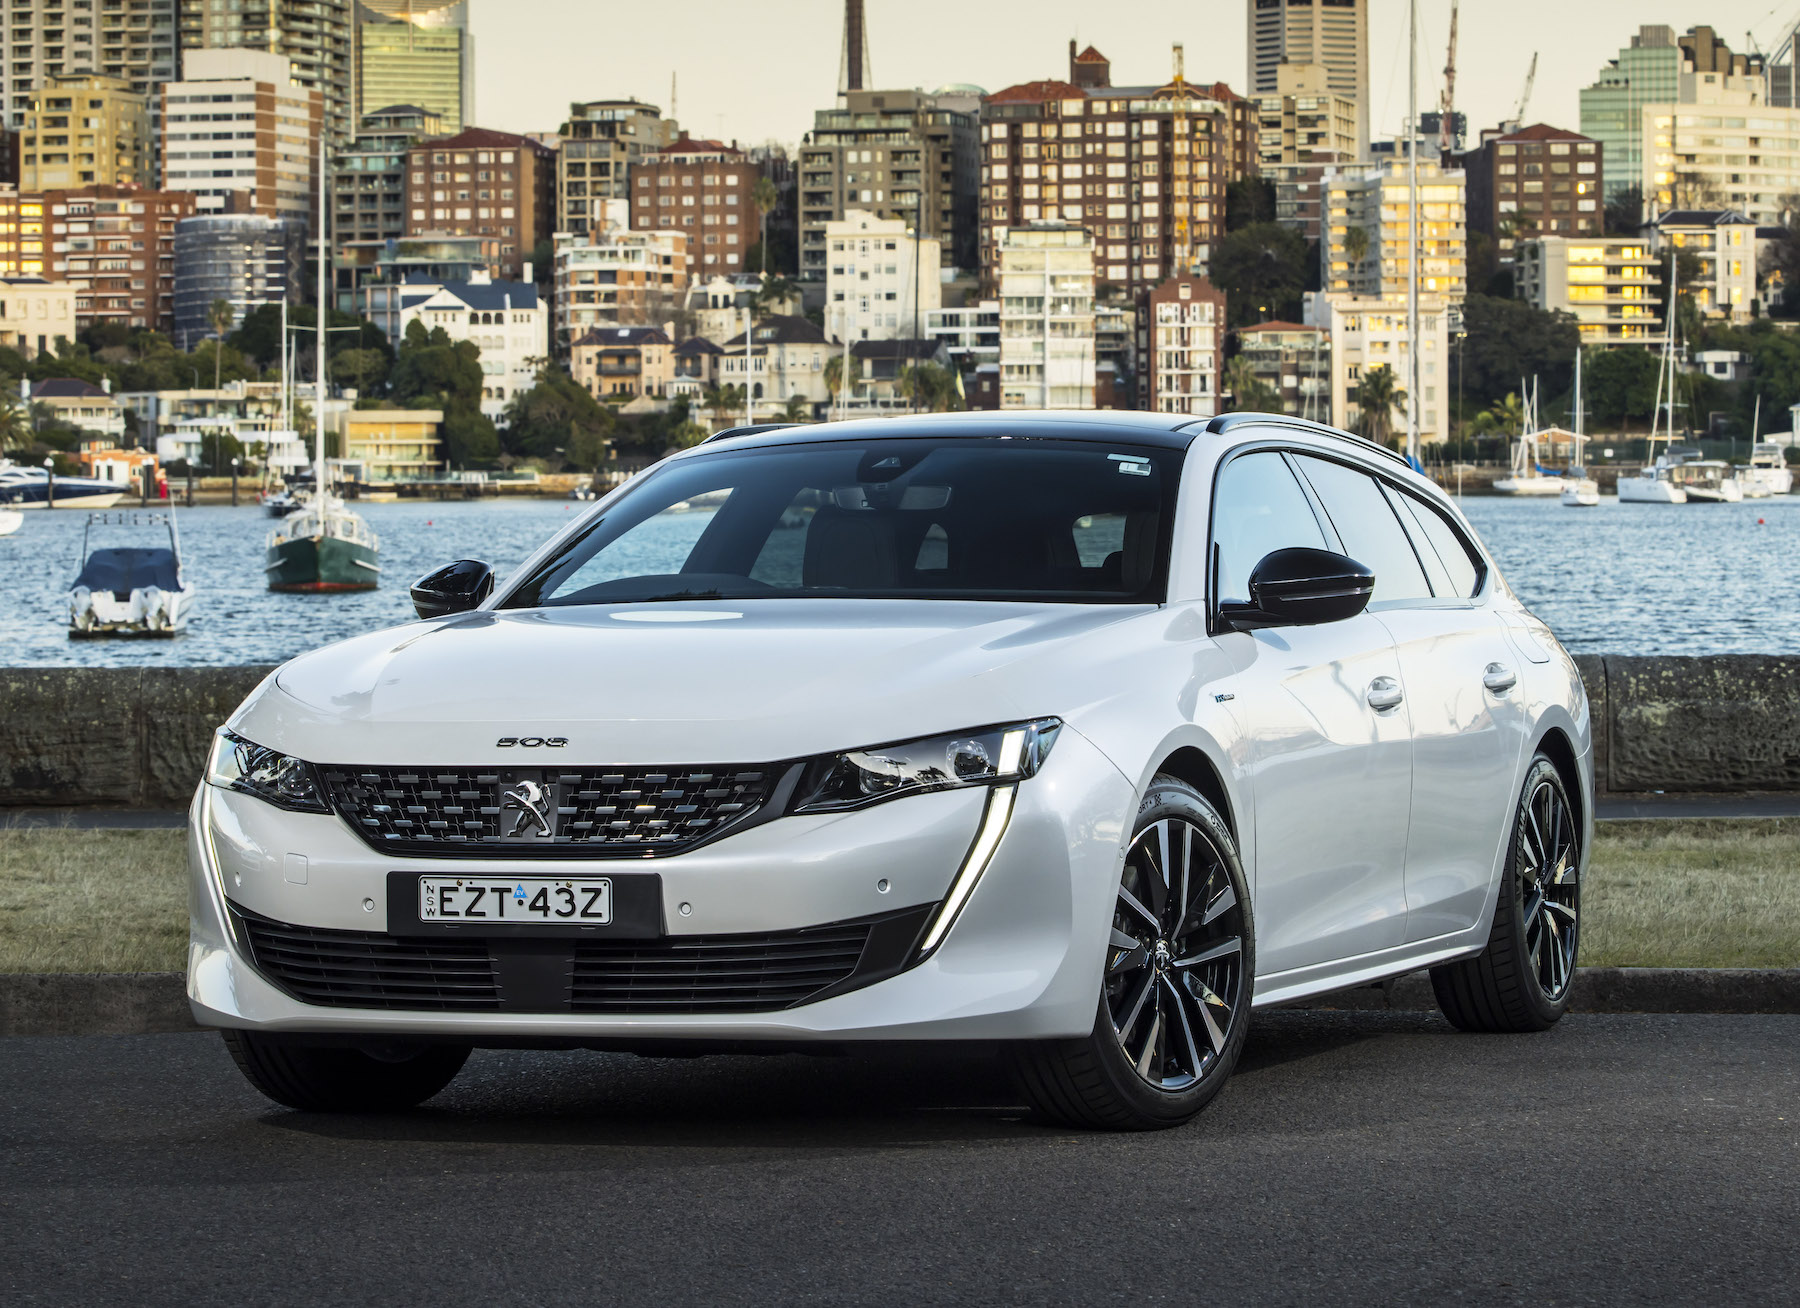 Peugeot’s 508 Plug-in Hybrid Sportswagon Lands in Showrooms with $82,915 Price Tag